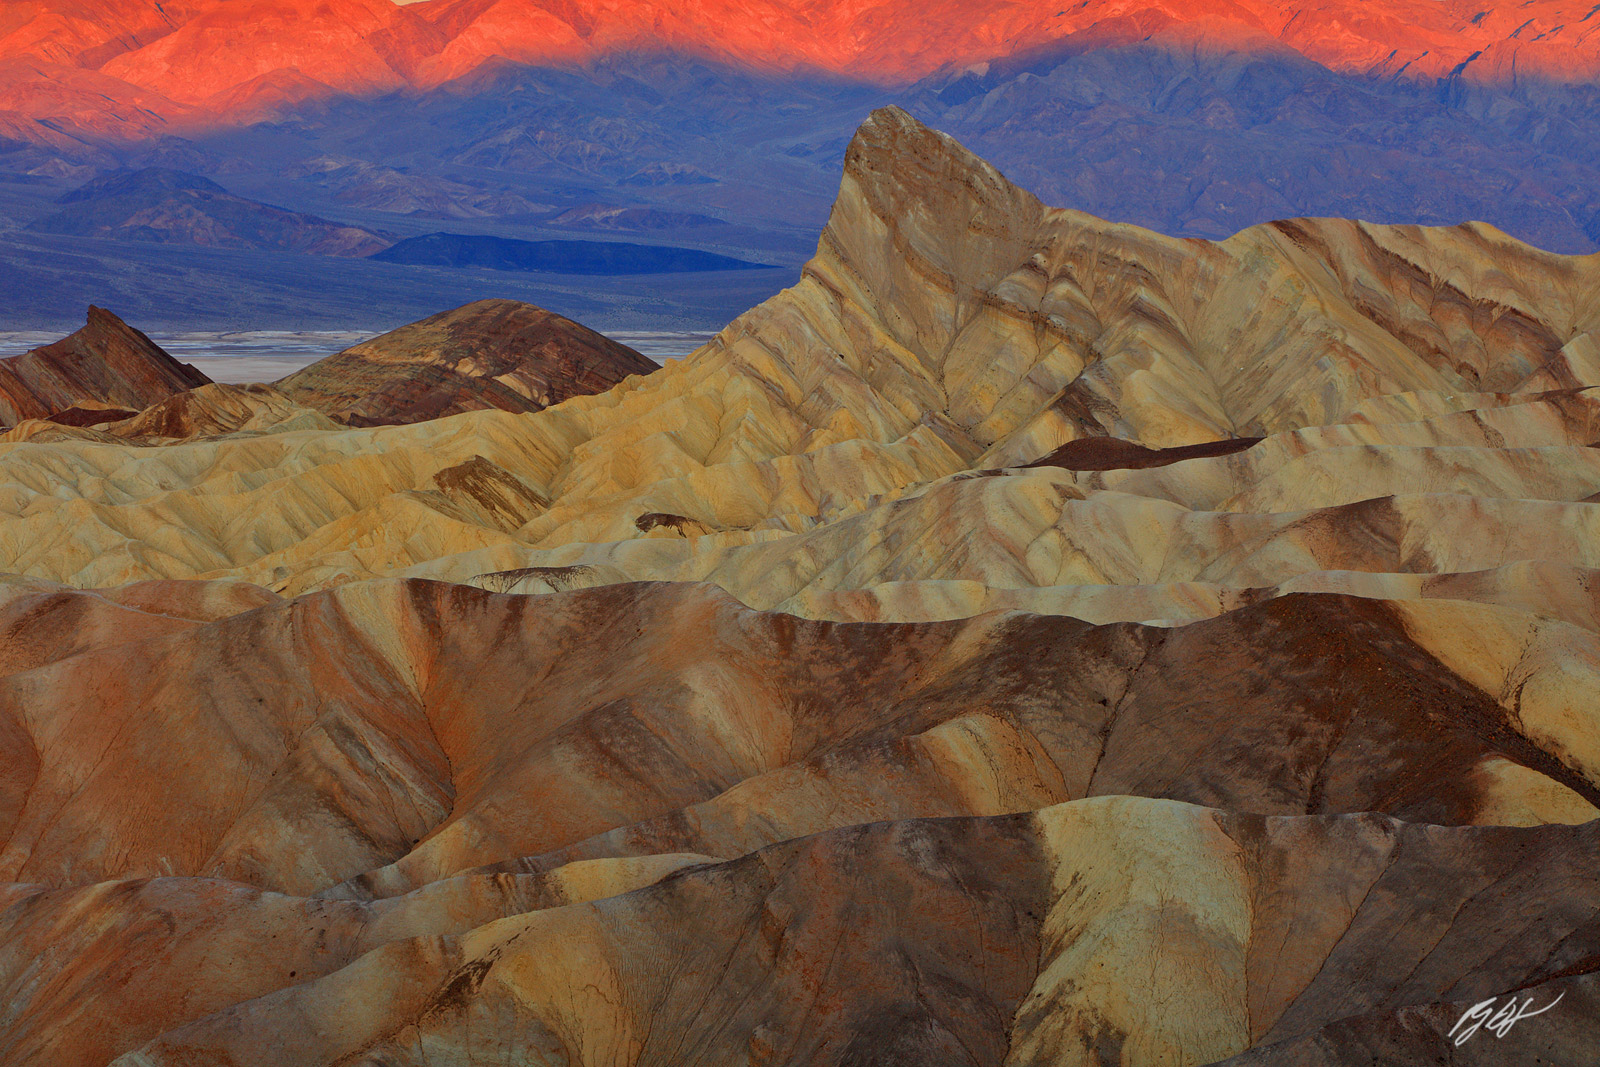 Sunrise Manly Beacon from Zabriskie Point in Death Valley National Park in California